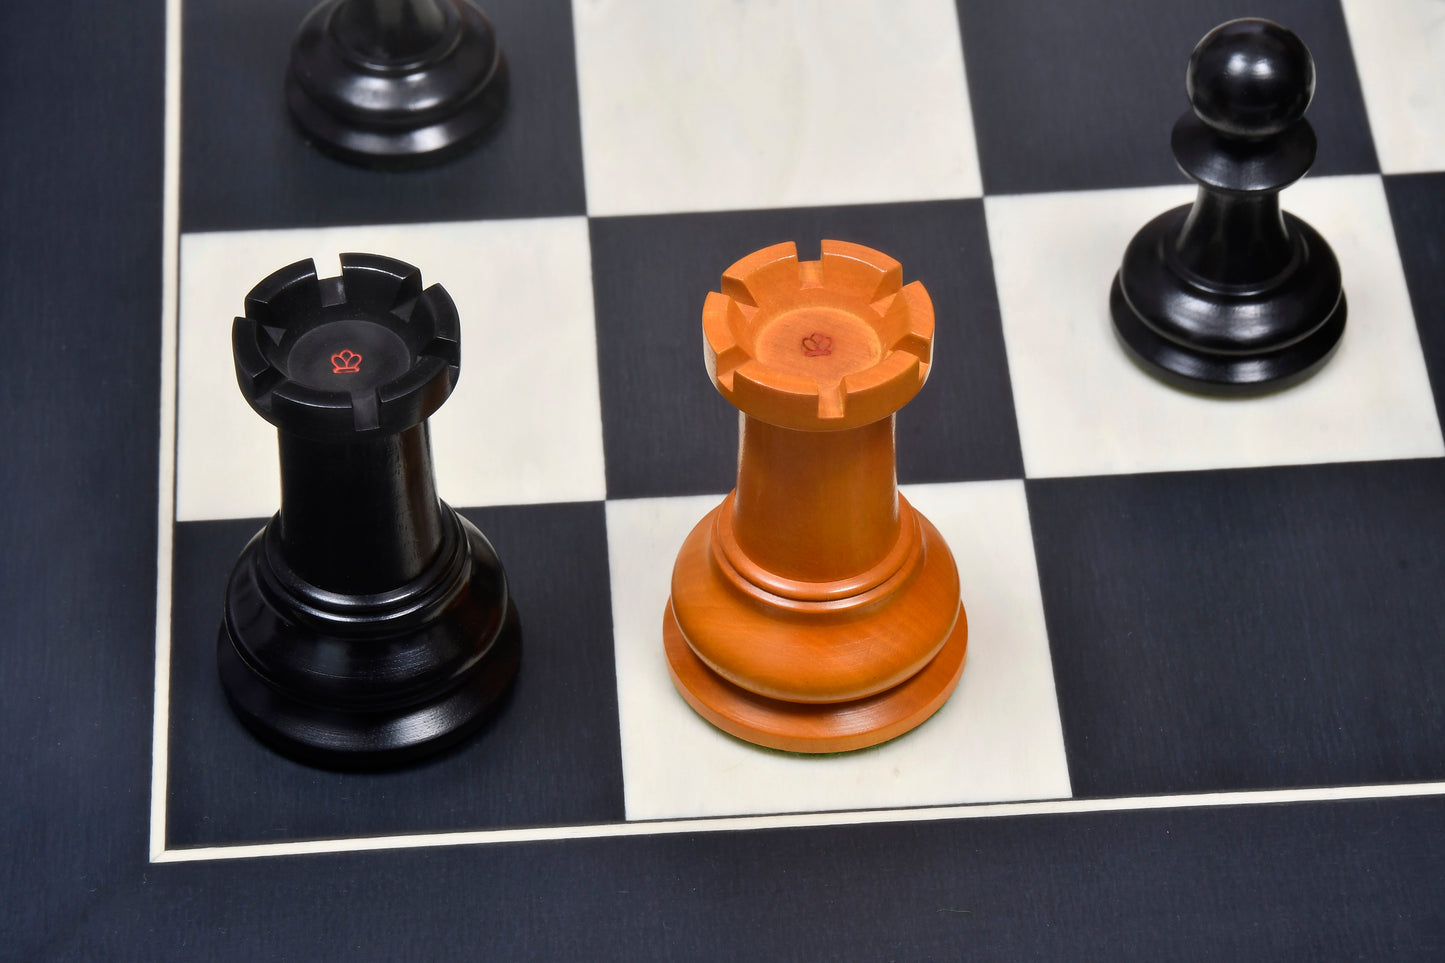 Reproduced 1850 Morphy Chess Pieces Only V2.0 in Ebony / Antiqued Box wood with King Side Stamping - 4.4" King